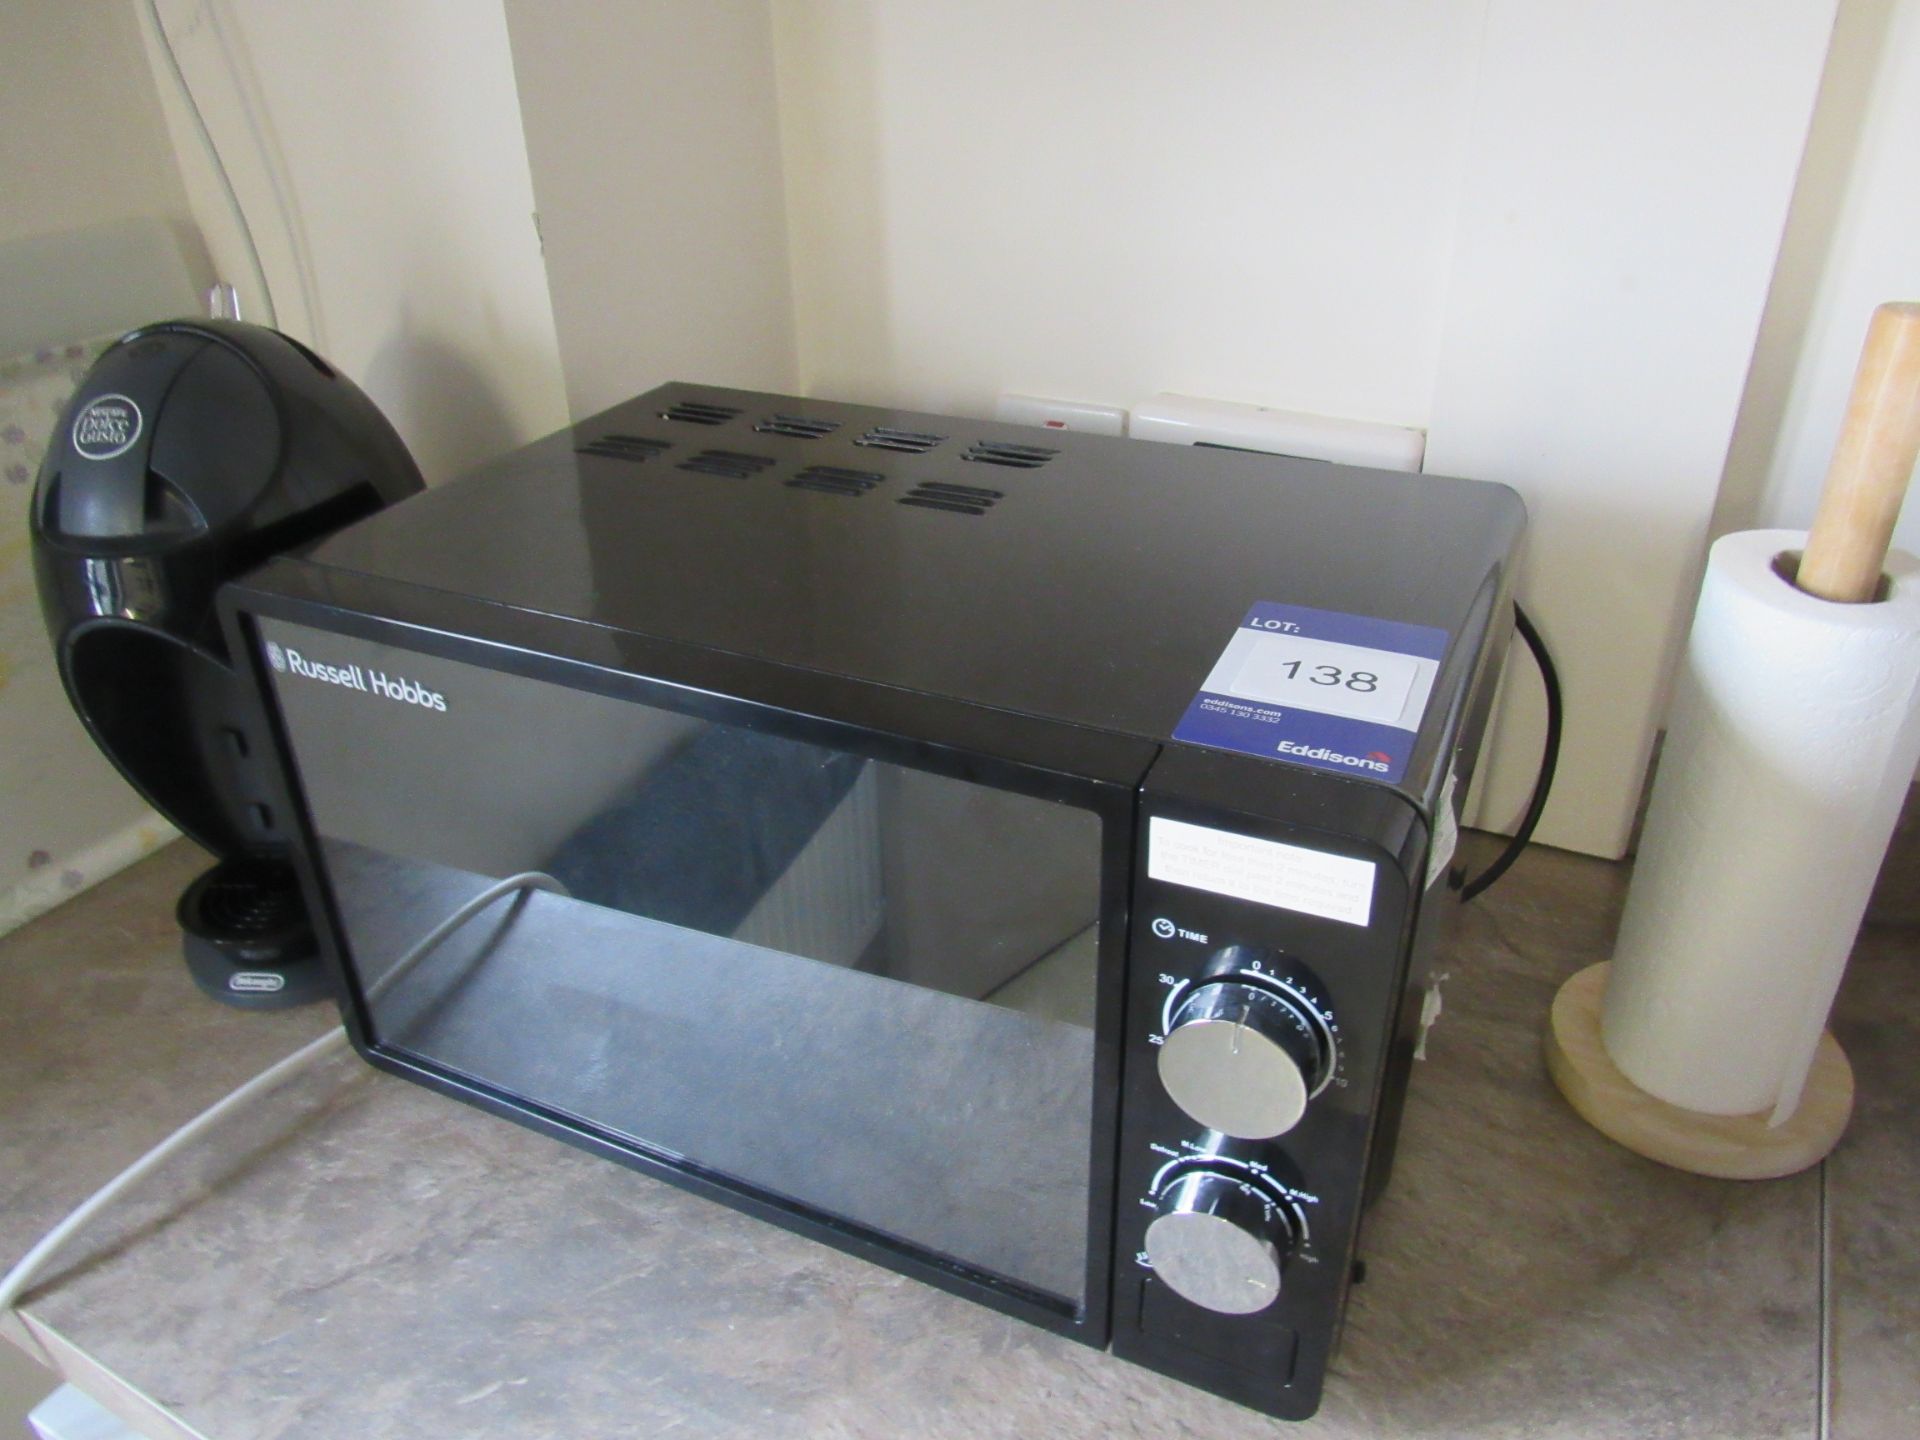 Russell Hobbs microwave oven